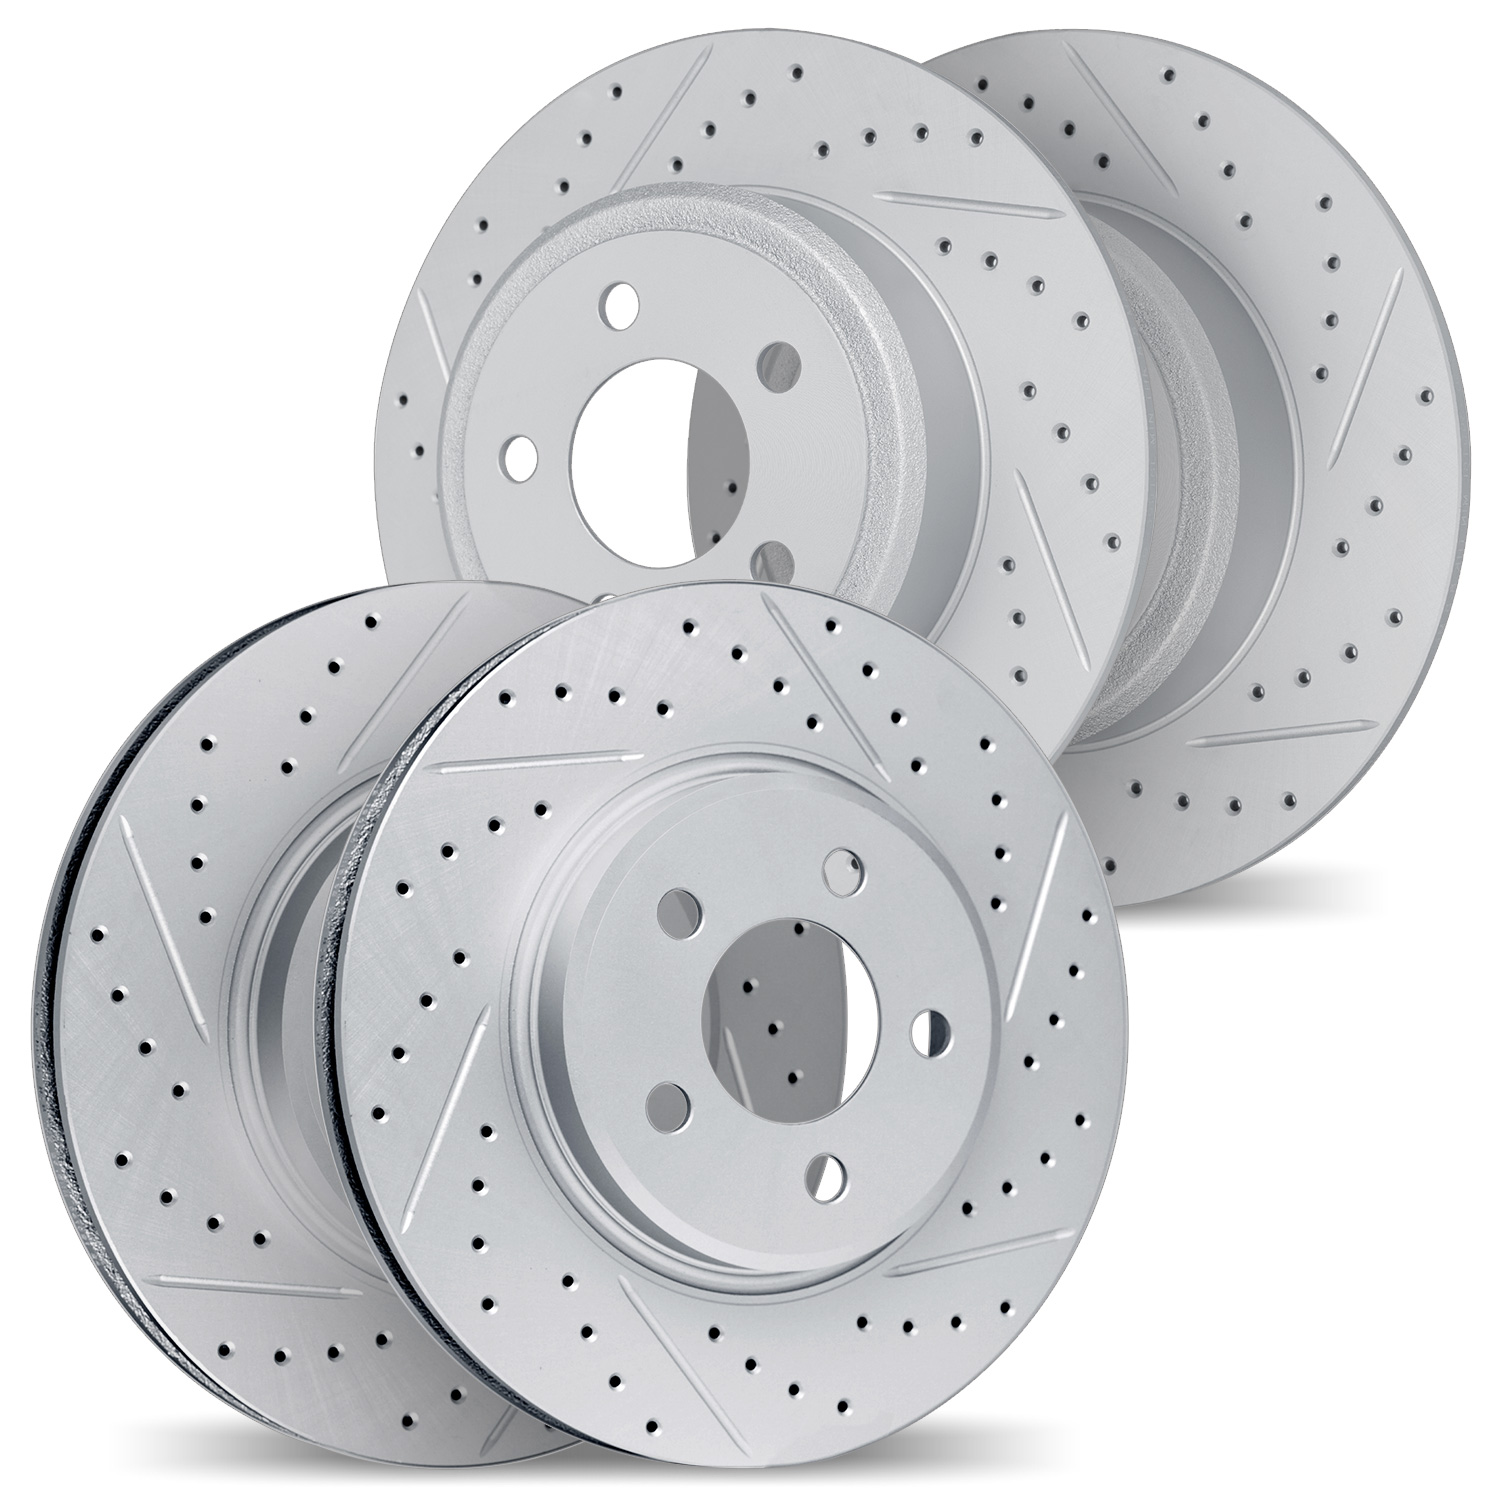 2004-54156 Geoperformance Drilled/Slotted Brake Rotors, 2015-2020 Ford/Lincoln/Mercury/Mazda, Position: Front and Rear